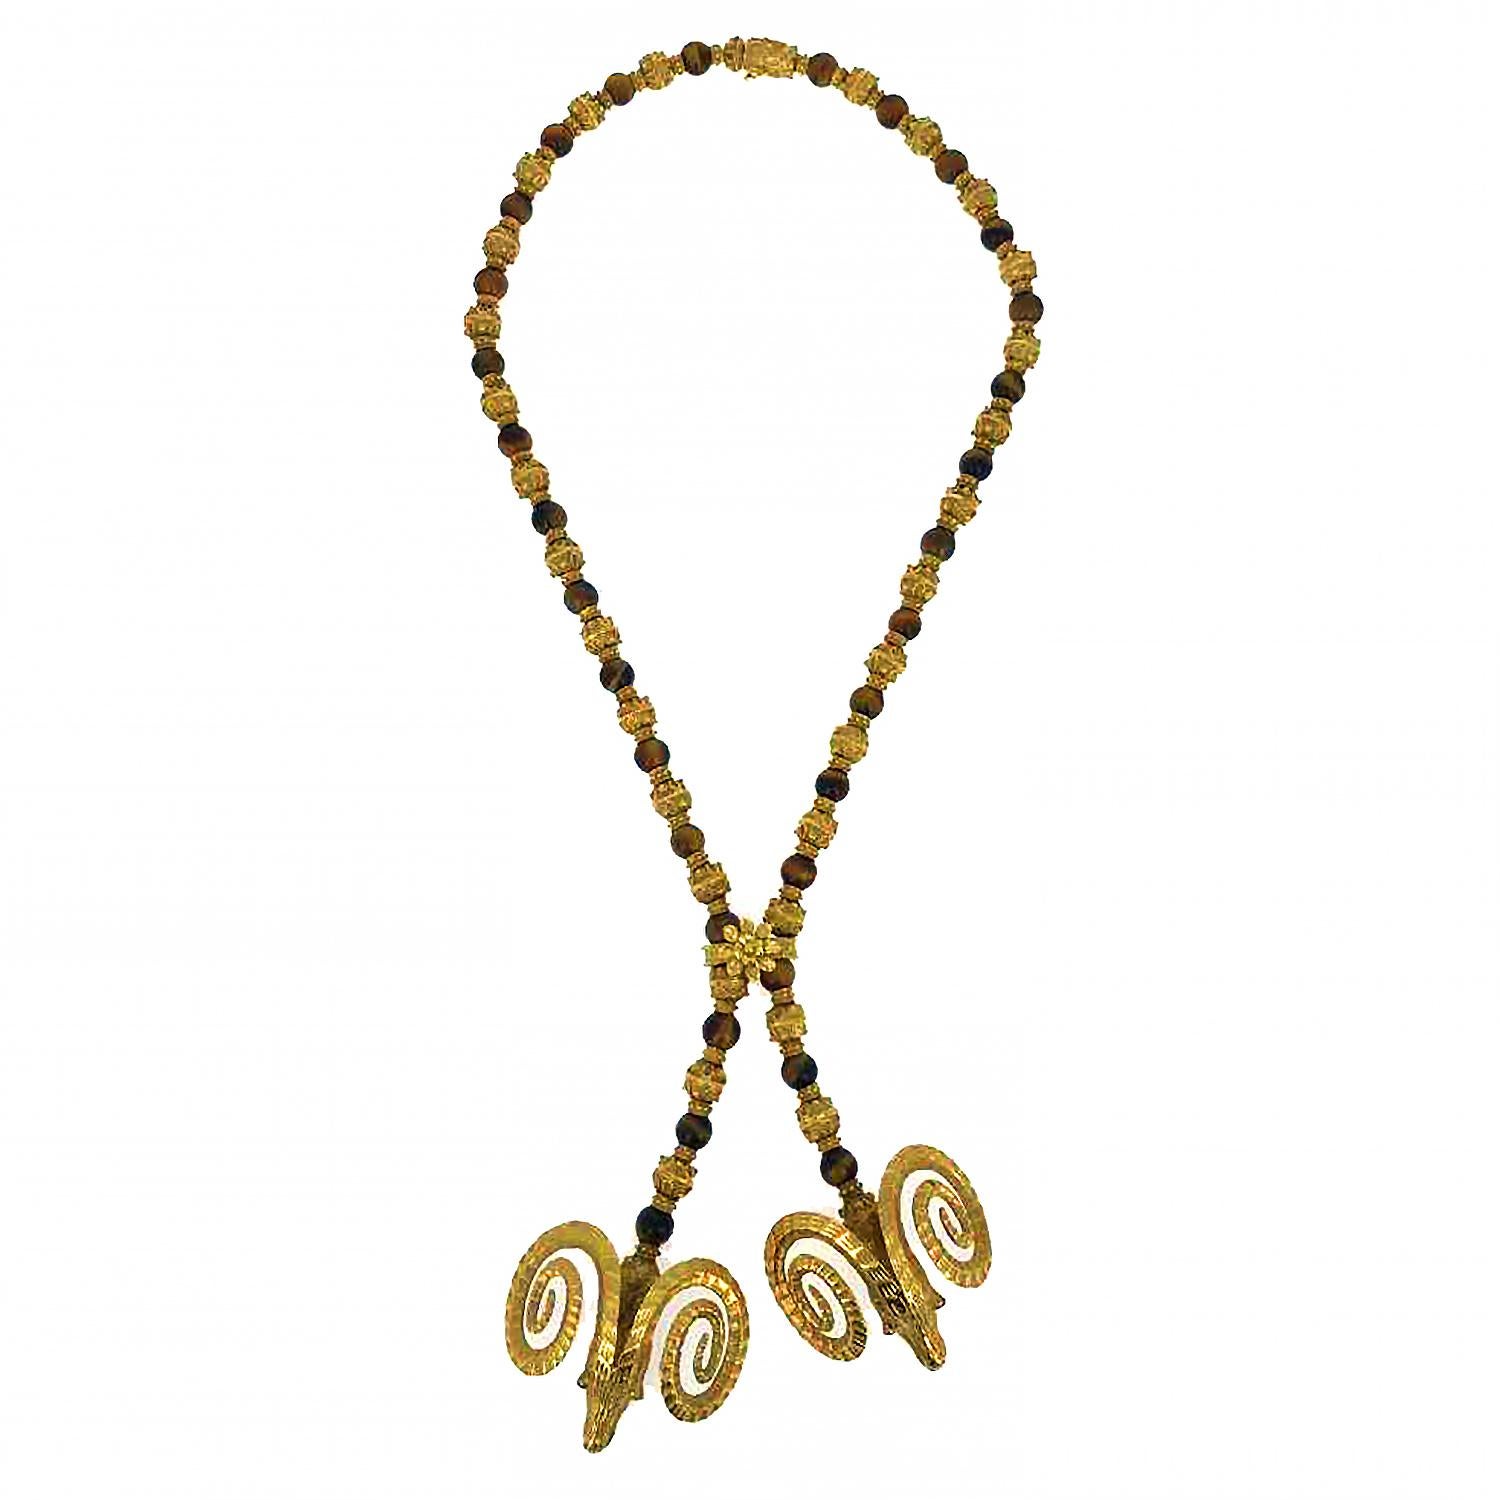 This vintage double-headed ram lariat necklace is comprised of alternating tiger's eye beads and textured 18 karat yellow gold beads with a twisted rope motif. The lariat clasp is fixed. The necklace is accompanied by a double-headed hinged ram